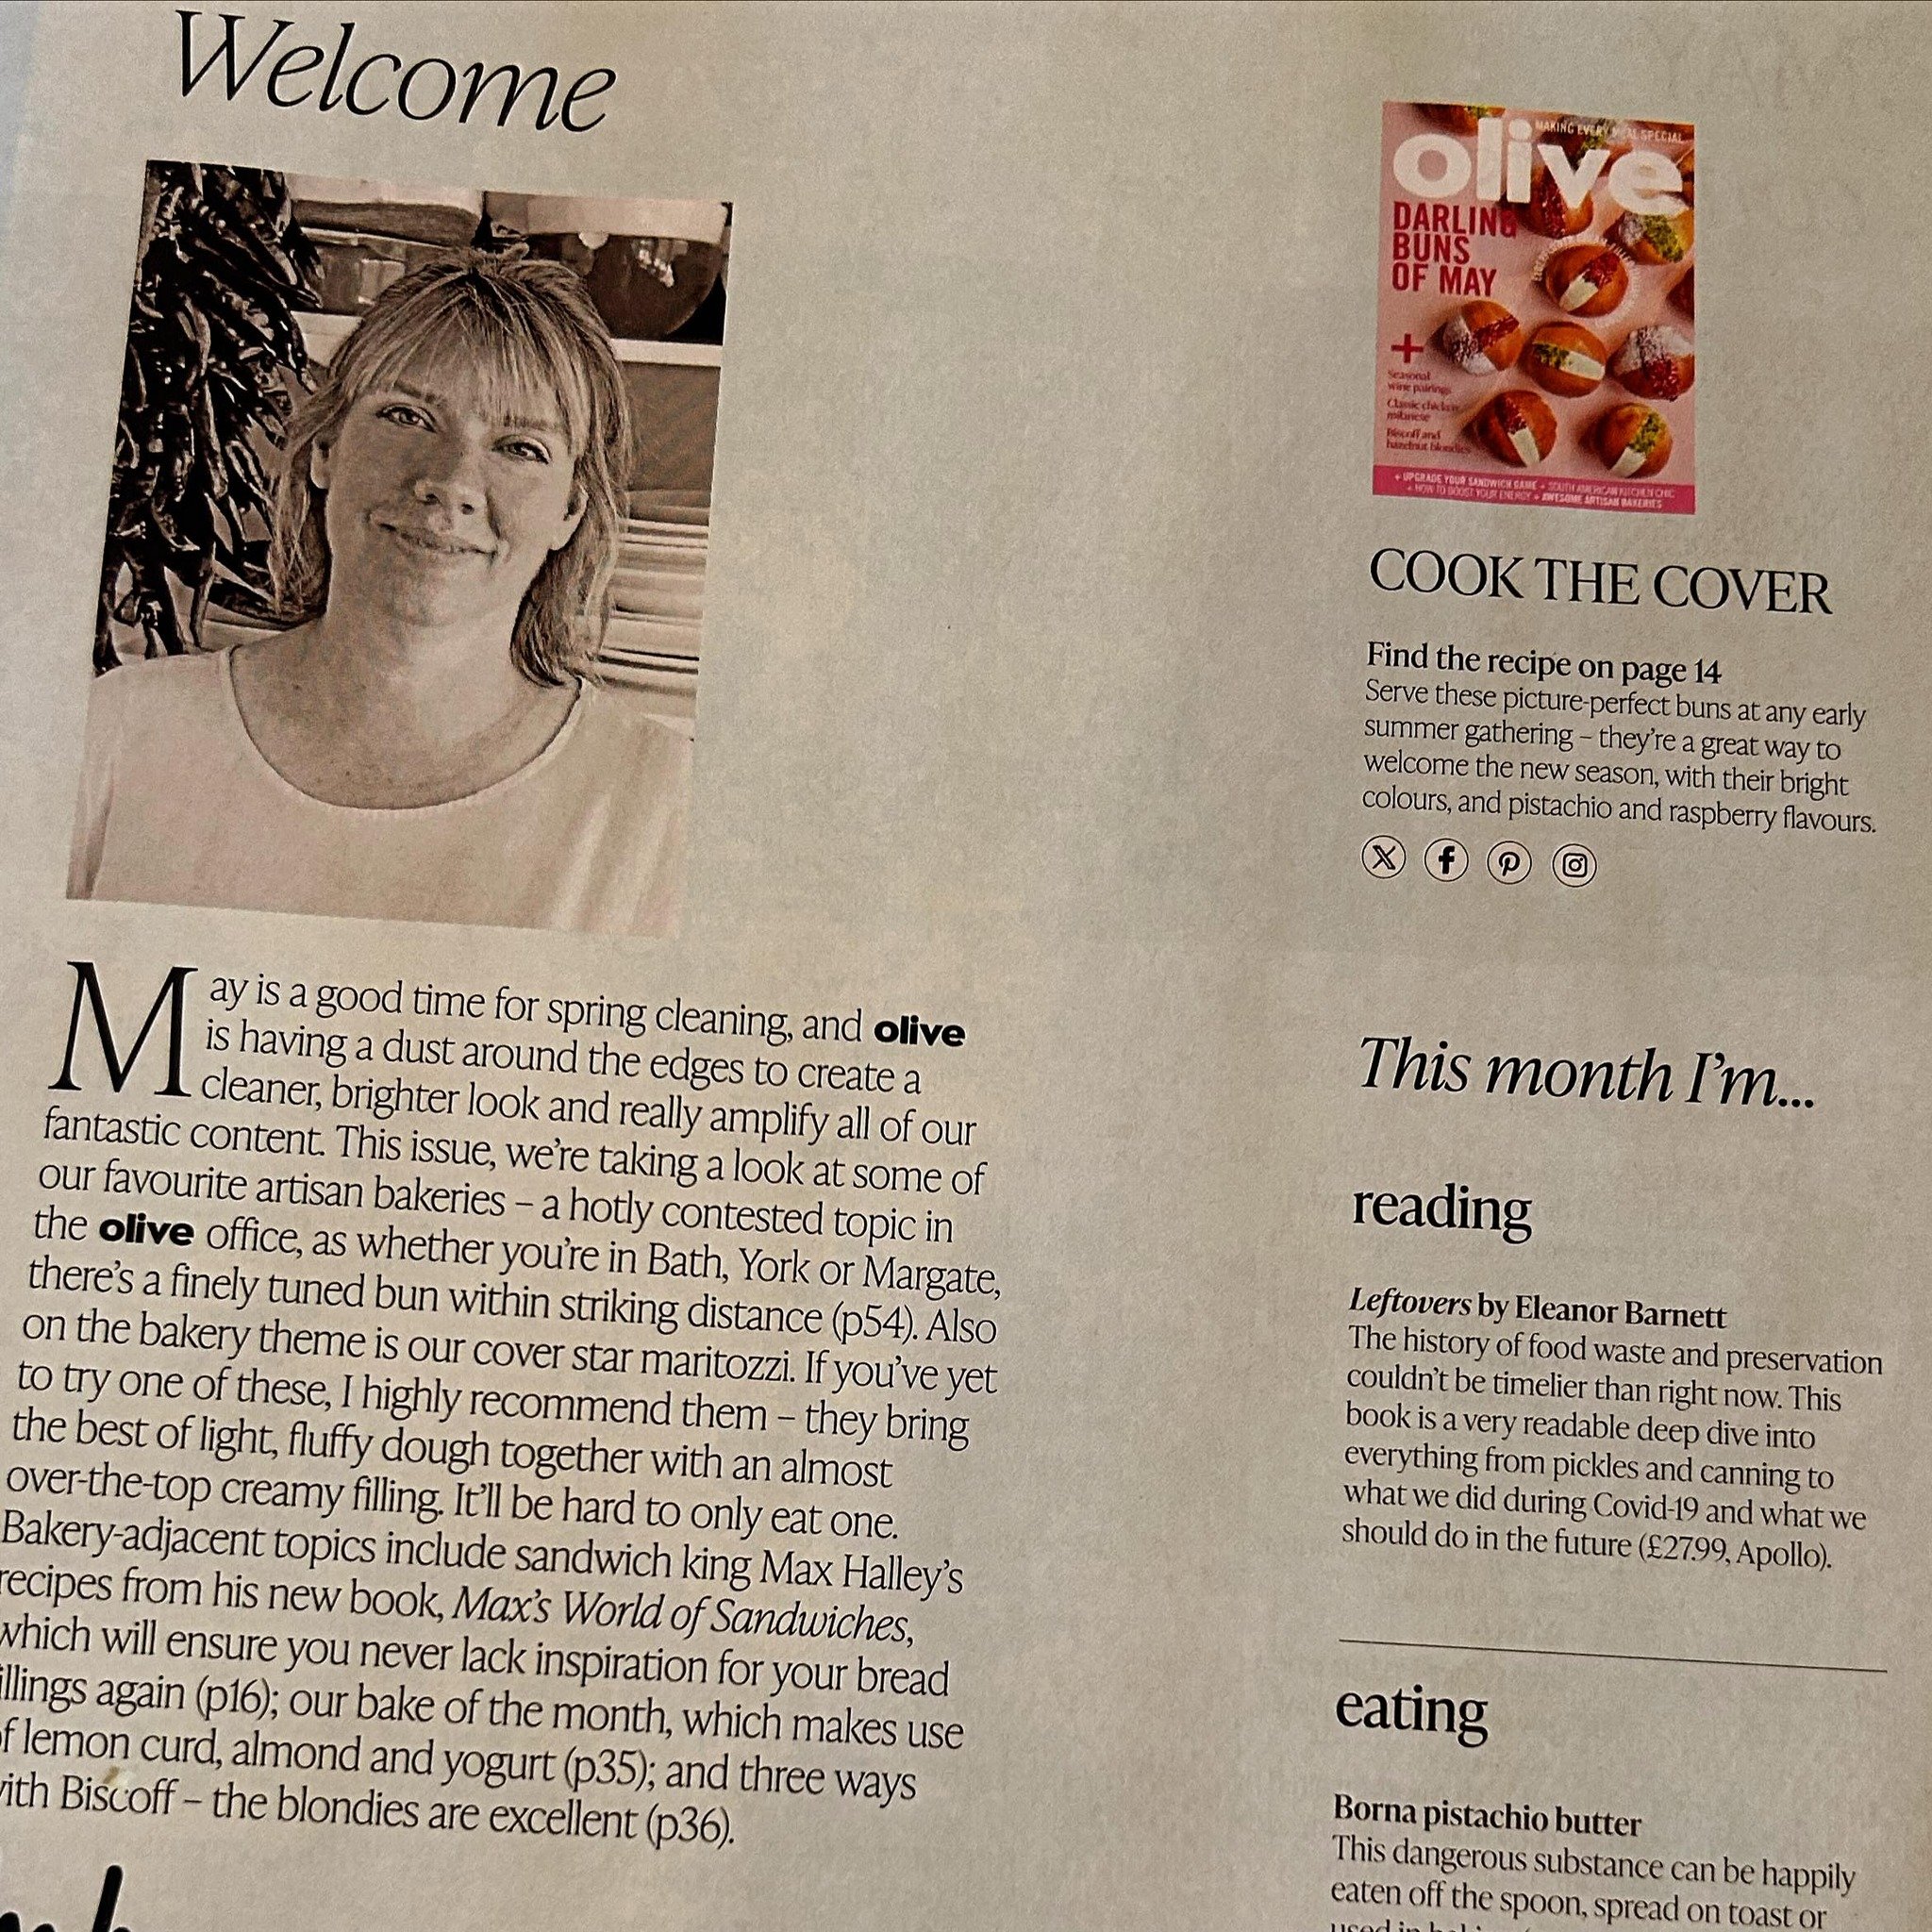 Chuffed to see my book Leftovers: A History of Food Waste and Preservation recommended in the editor&rsquo;s page of @olivemagazine 🫒🥰♻️

Find out more via link in bio ⬆️

#historyeats #foodhistory #historyoffood #foodwaste #leftovers #leftoversbar